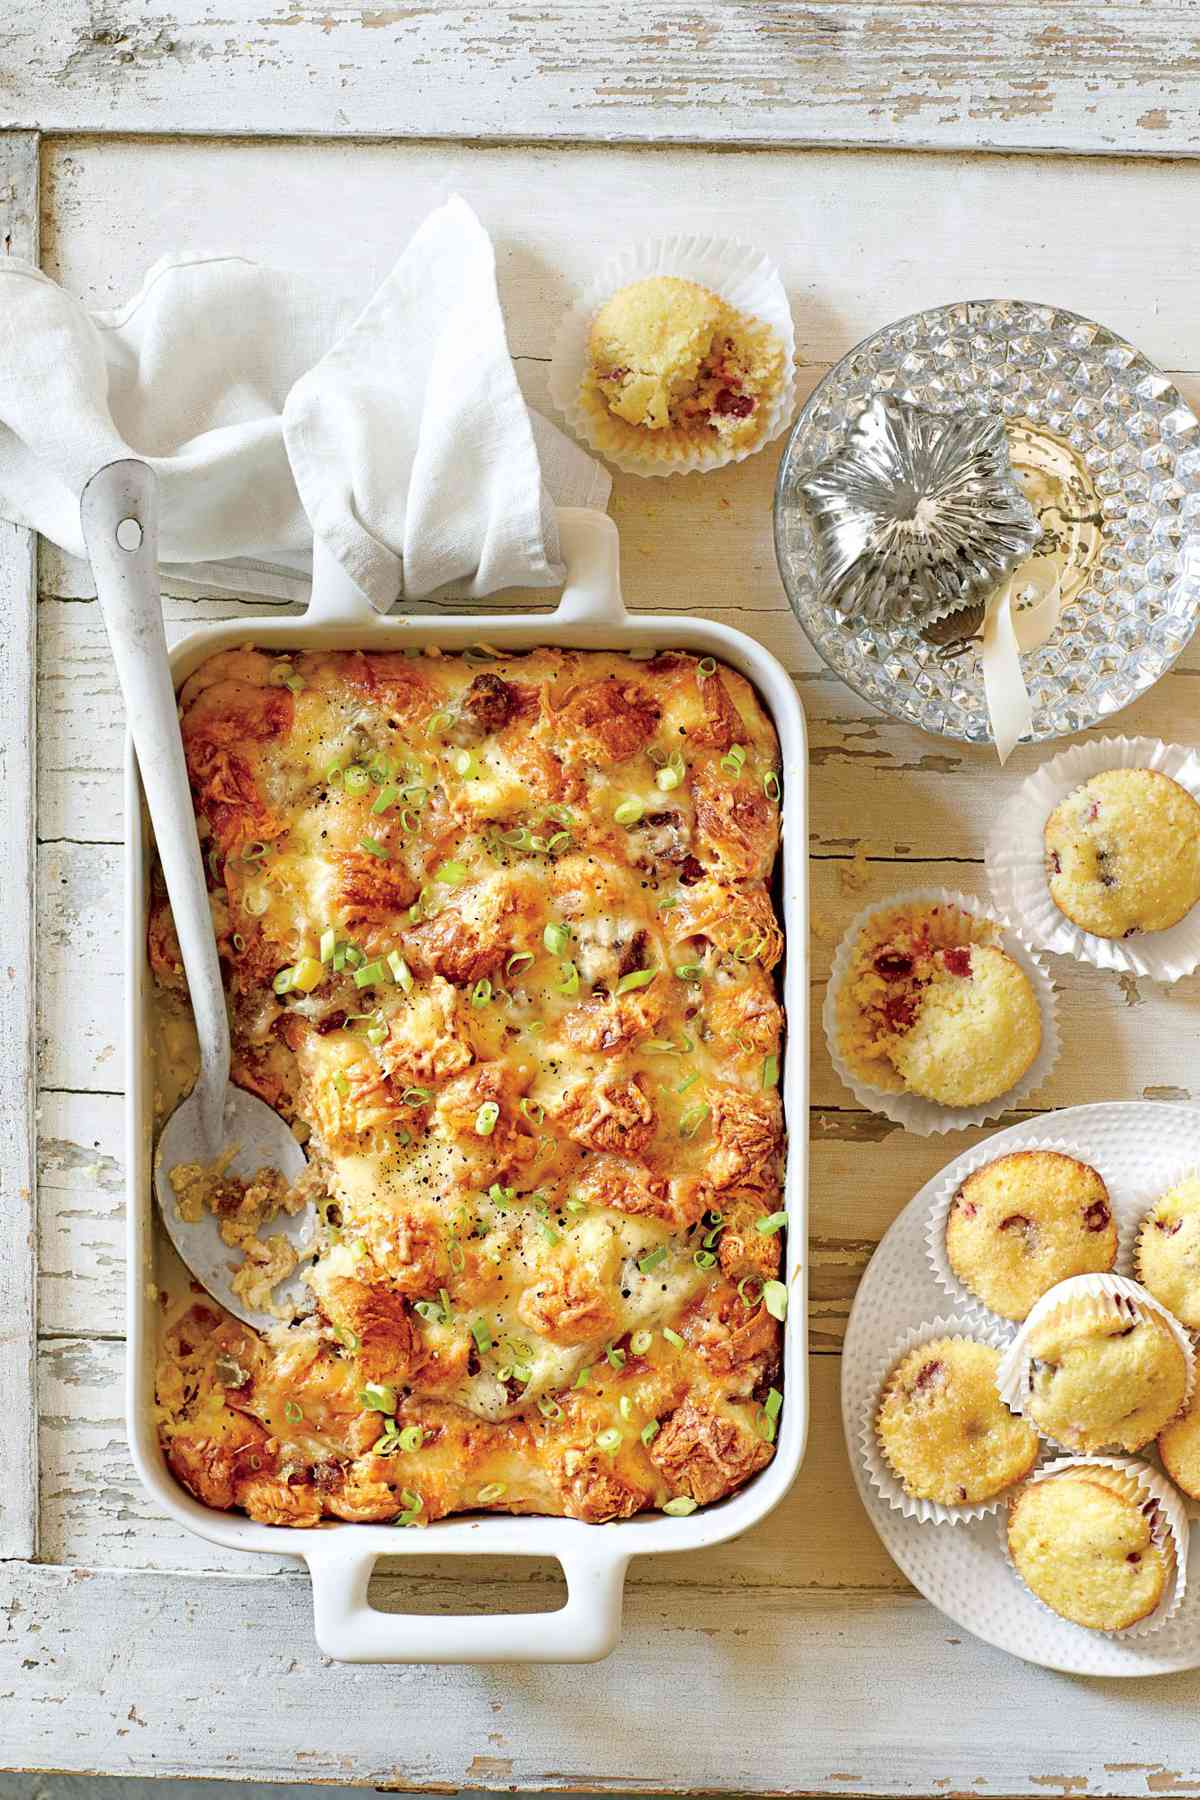 Cheesy Sausage-and-Croissant Casserole